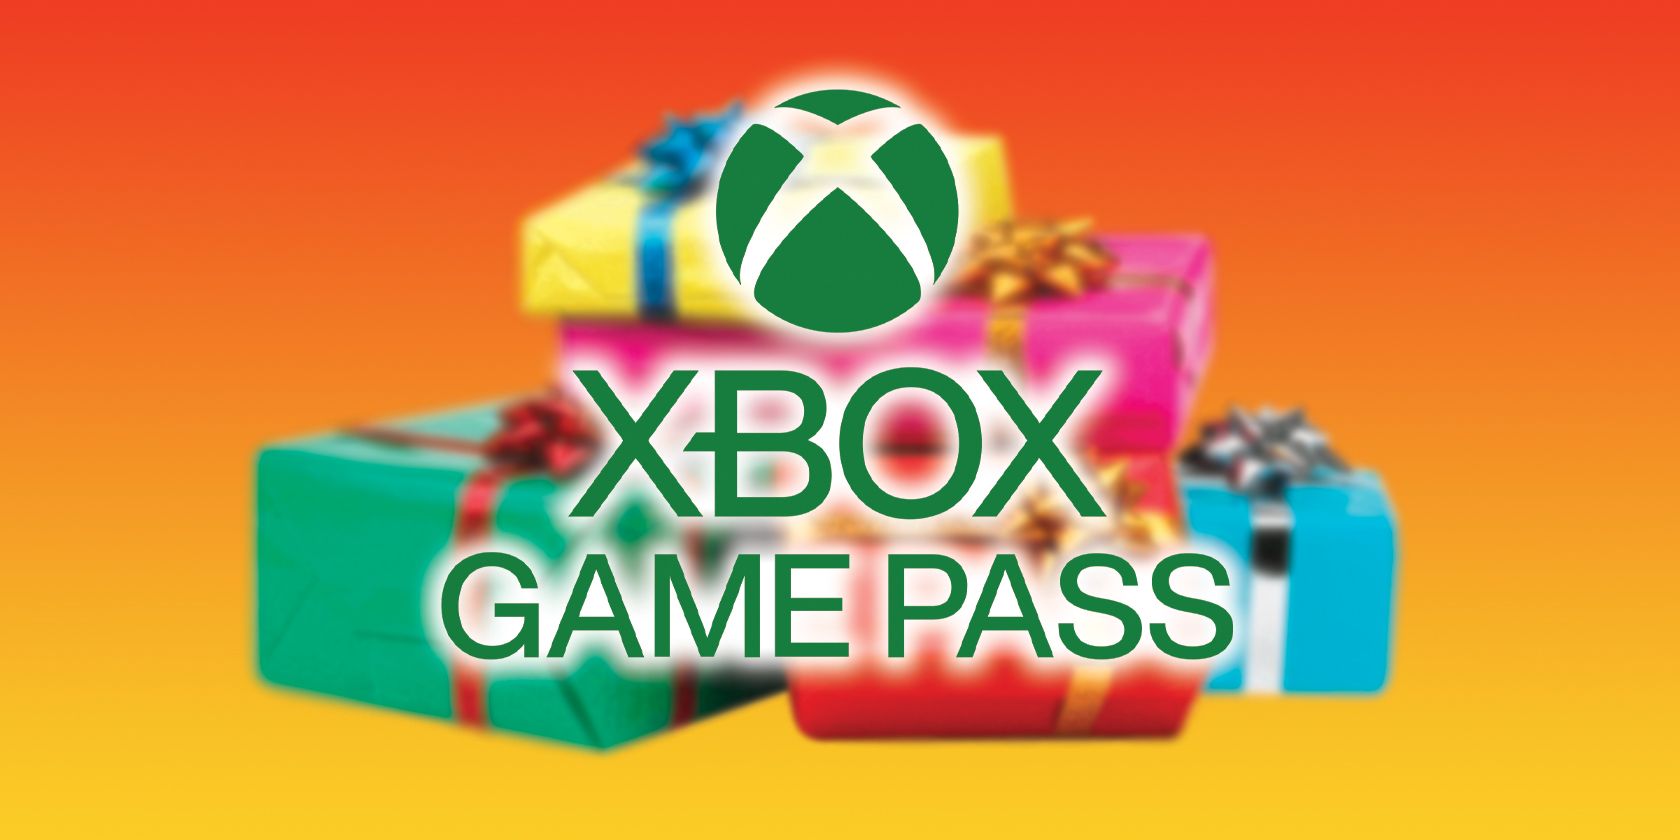 how to claim xbox game pass perks on mobile